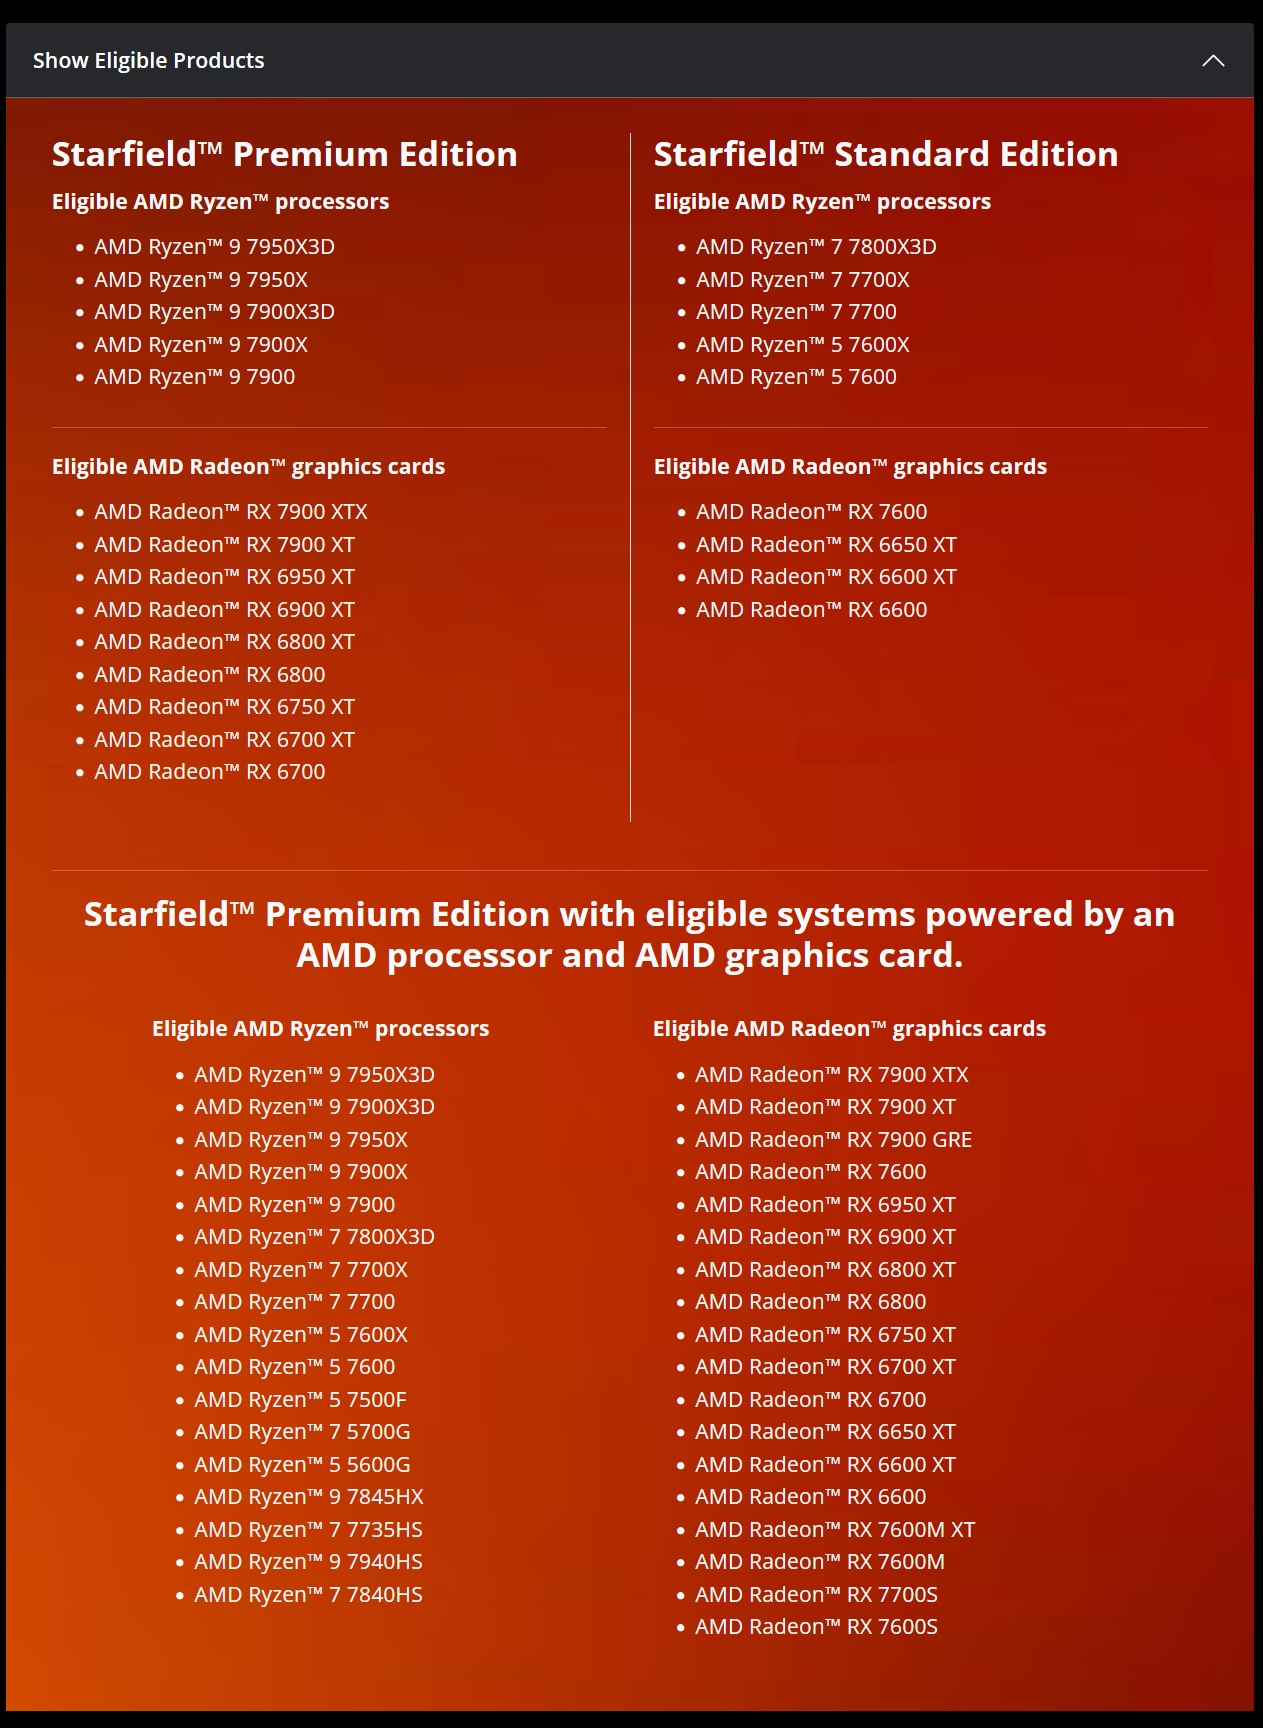 Starfield Giveaway: Participate And Get It For Free!